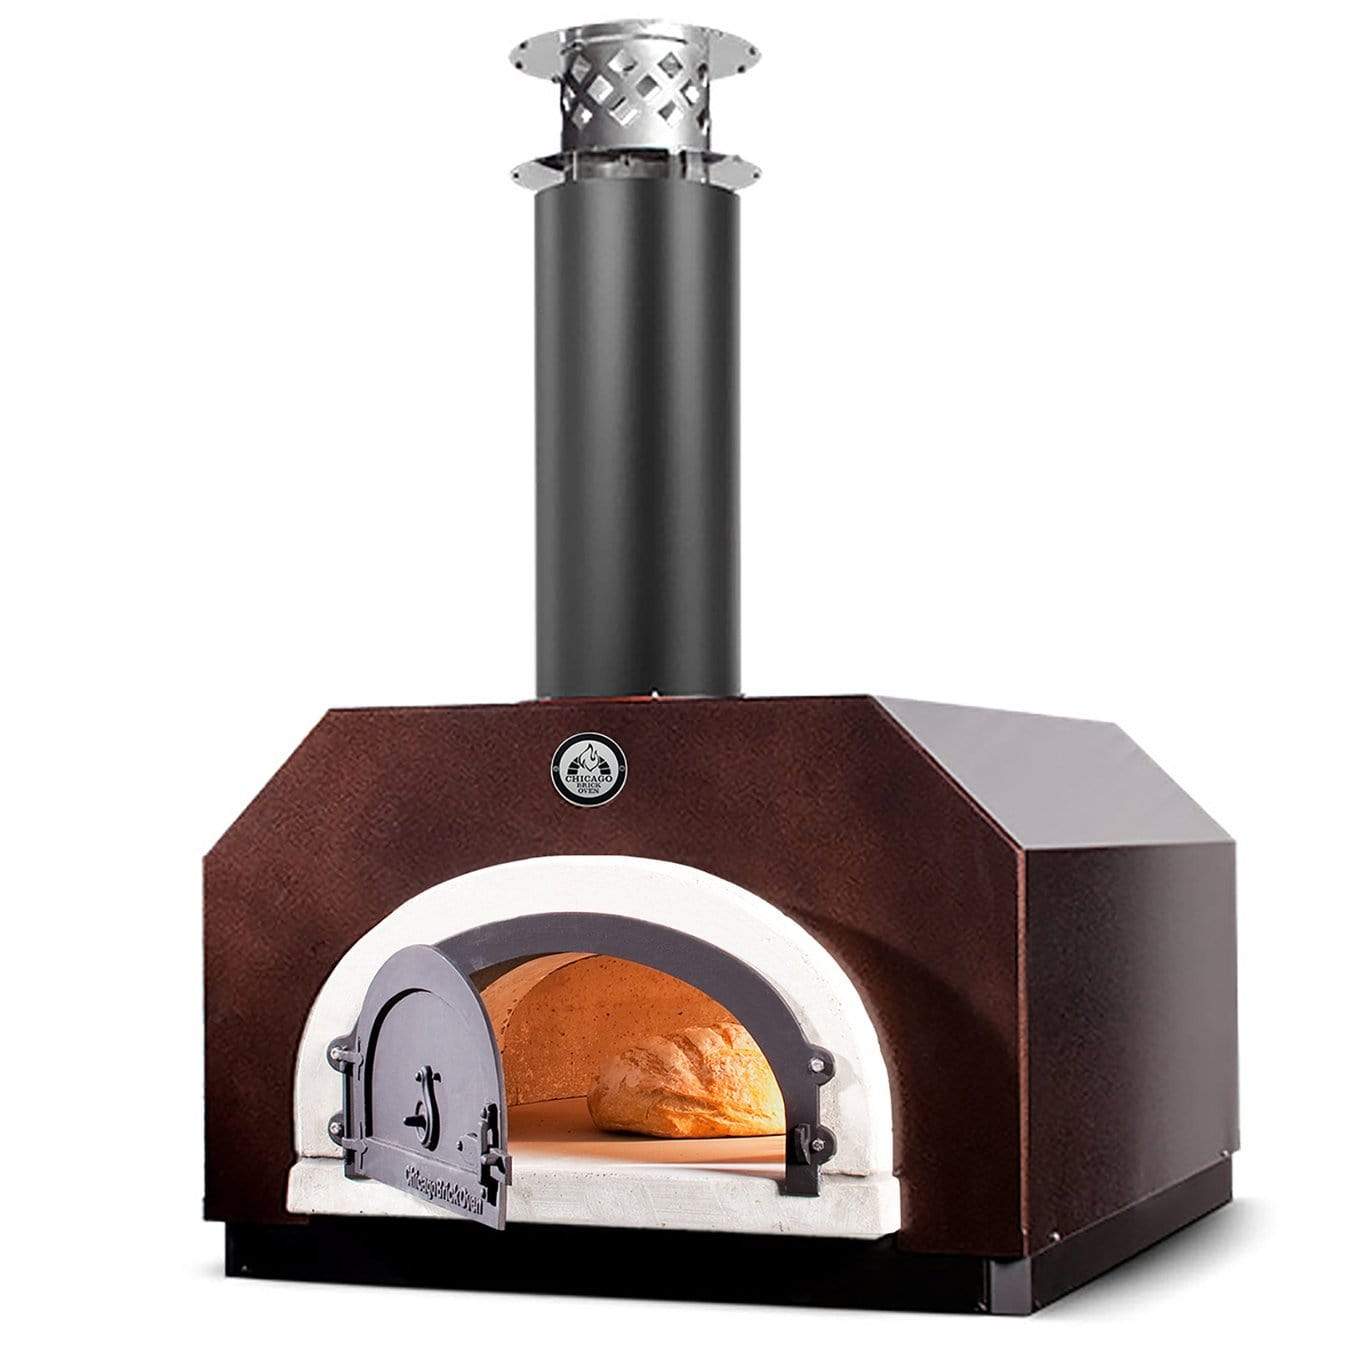 Chicago Brick Oven Pizza Ovens Copper Vein Chicago Brick Oven Wood Fired Pizza Oven / CBO-750 Countertop / 38" X 28" Cooking Surface / CBO-O-CT-750